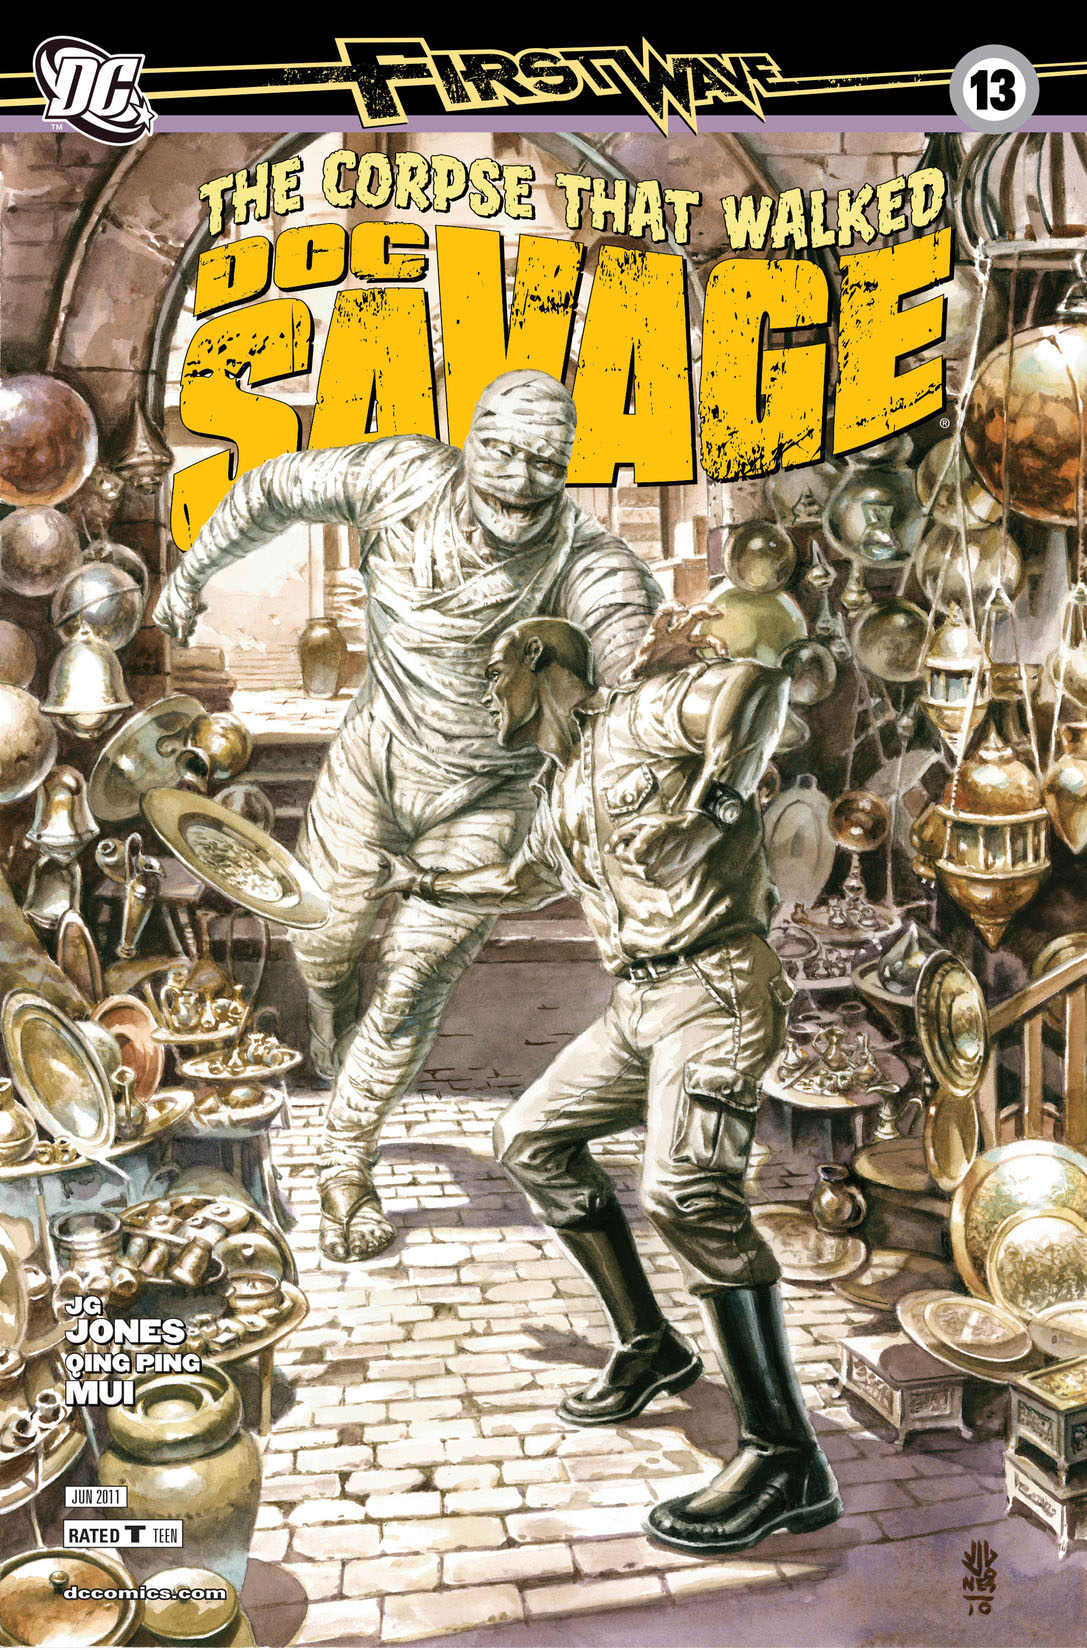 Doc Savage #13 preview images